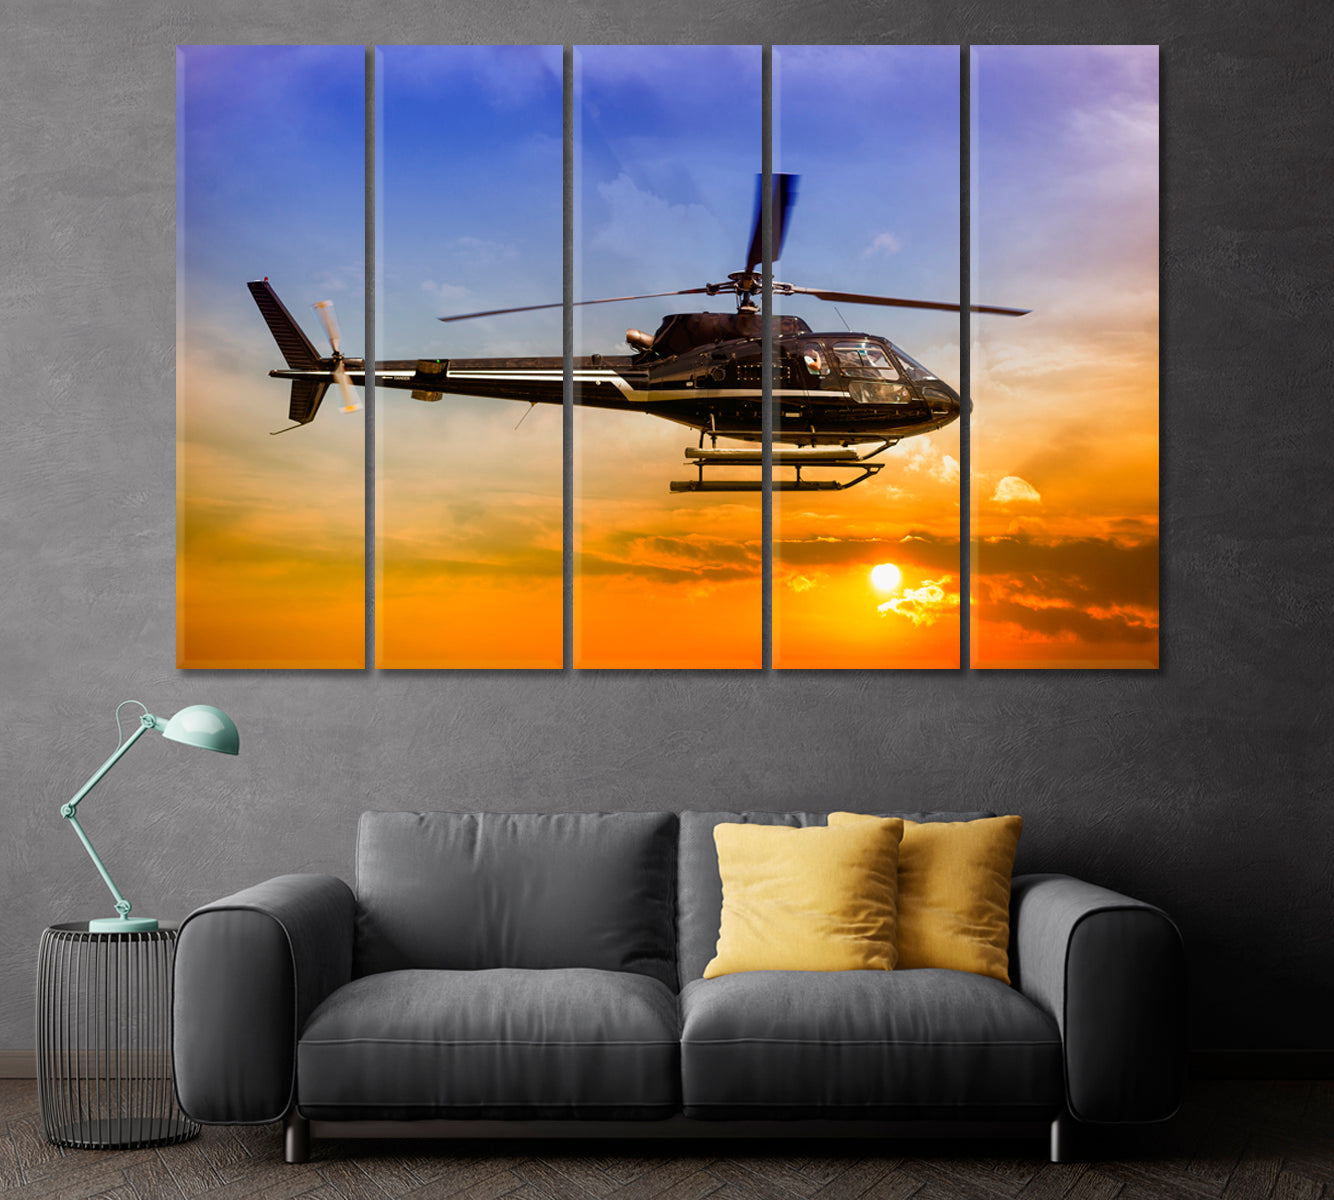 Sightseeing Helicopter Canvas Print ArtLexy 5 Panels 36"x24" inches 